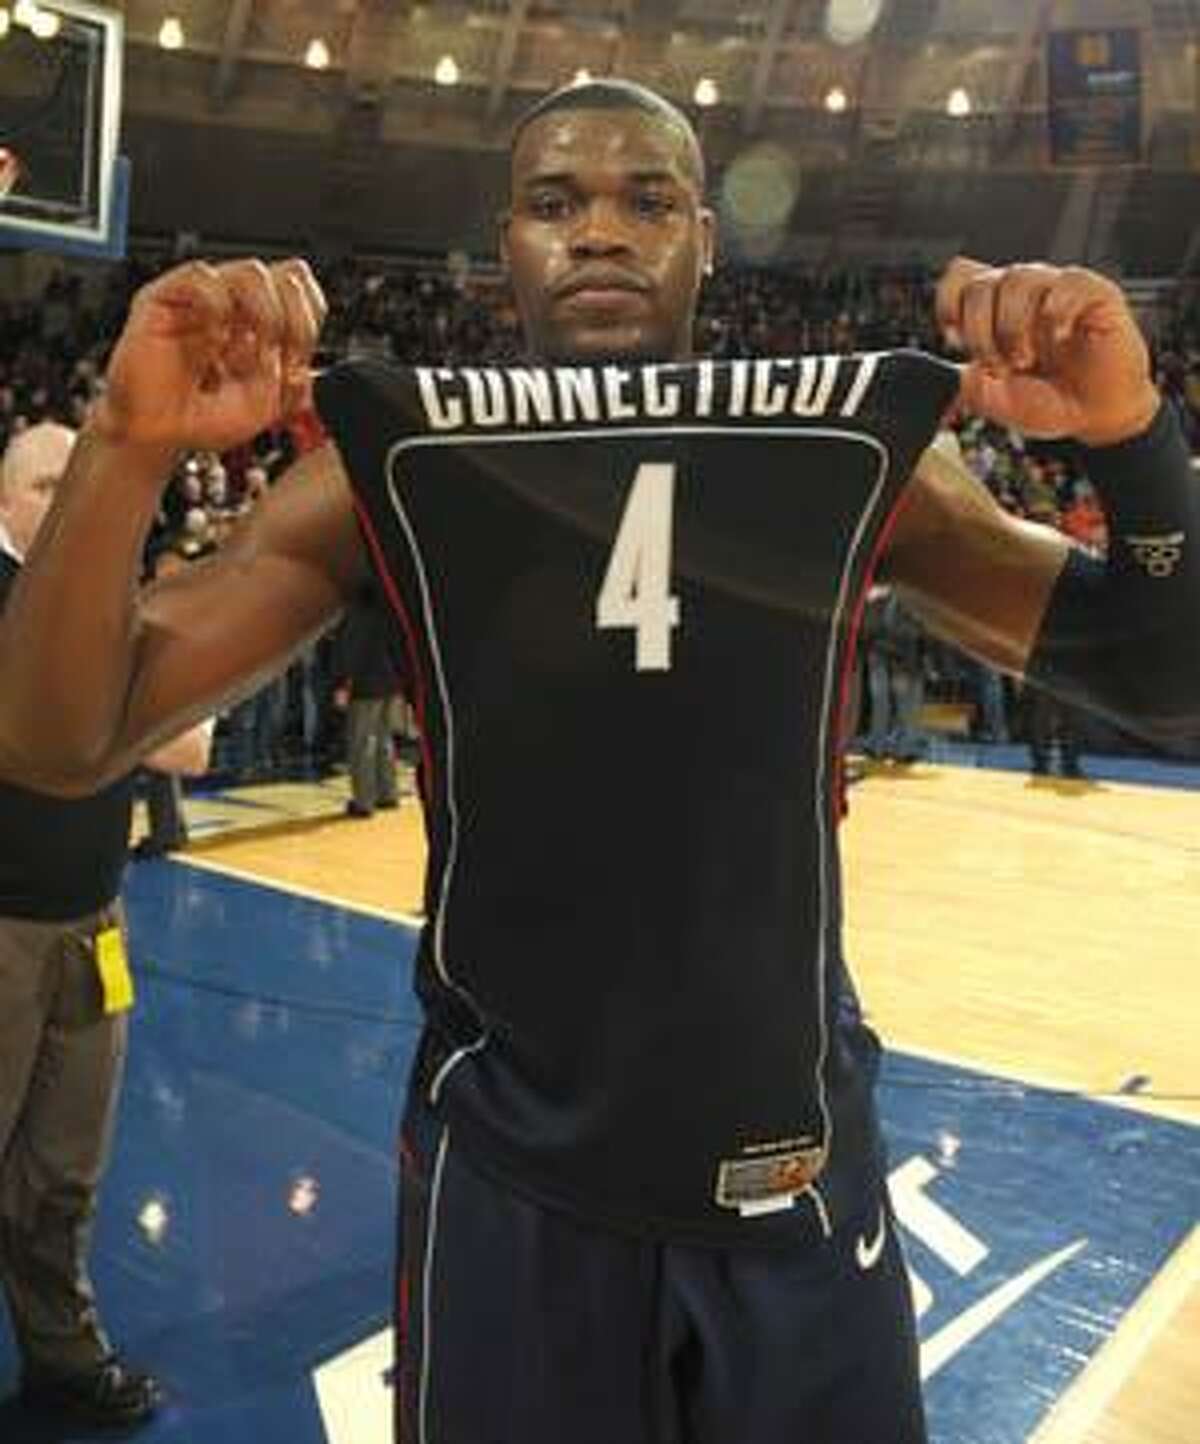 Connecticut guard Jeff Adrien displays his jersey following his team's 69-61 victory over Notre Dame Saturday in South Bend, Ind. Adrien scored 12 points and had 19 rebounds.